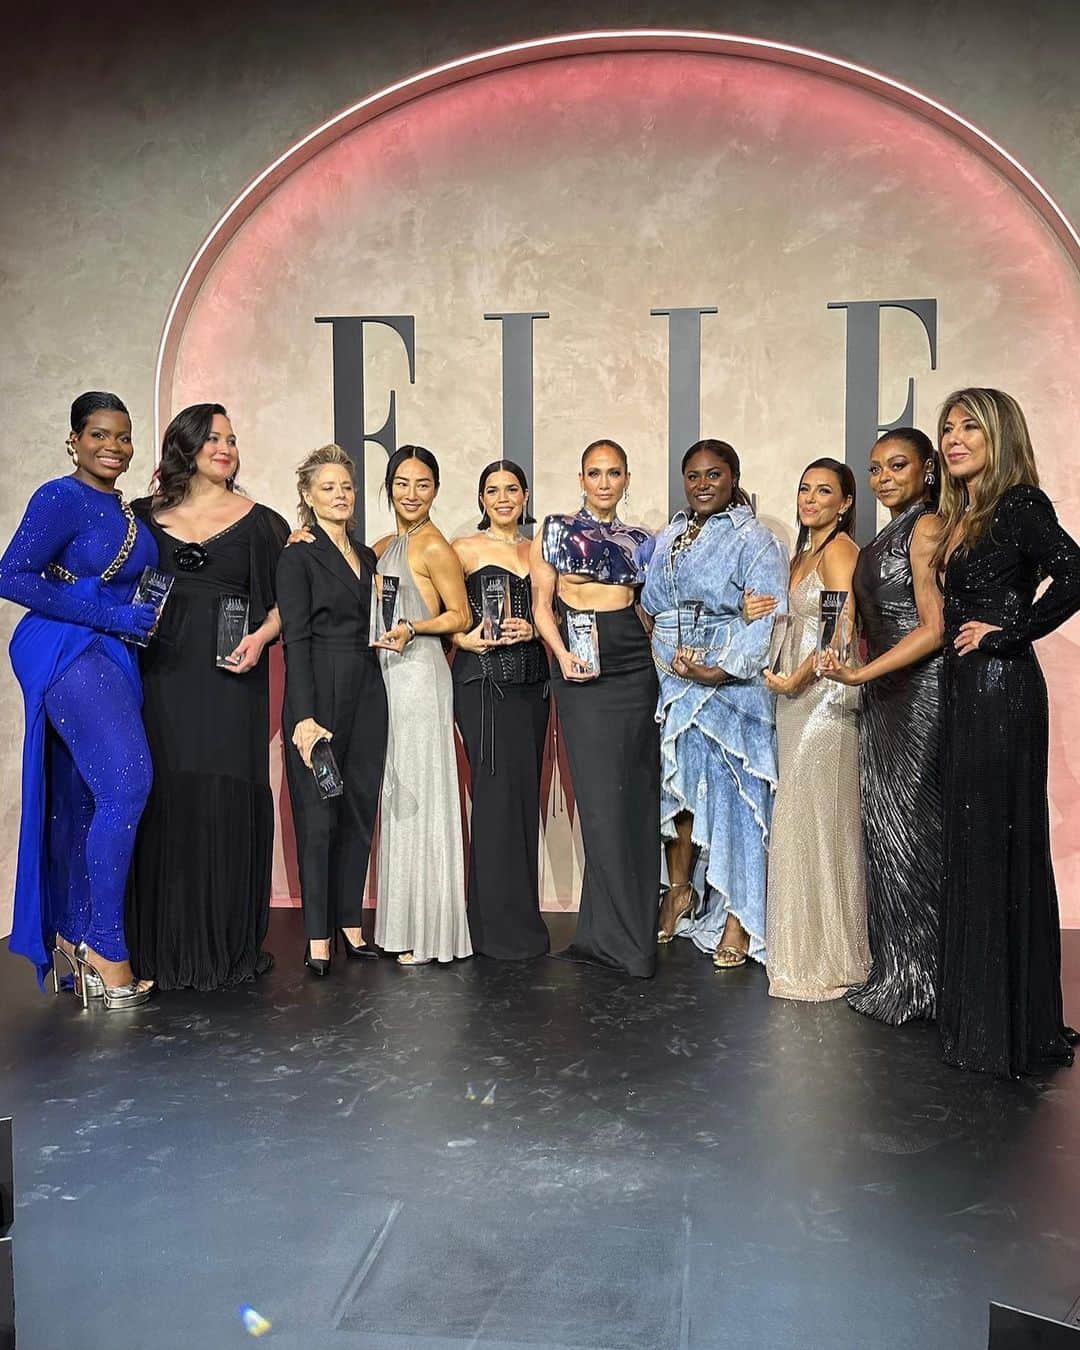 アメリカ・フェレーラさんのインスタグラム写真 - (アメリカ・フェレーラInstagram)「Santa Maria! Hot damn! Holy Shmoly!! I can not find the words to convey the amazingness of last night at Elle Women in Hollywood. Being in a room full of women I love and admire was life-giving! Every single speech was personal, wise and profound. My soul sister Eva Longoria presented me with the most moving speech I have ever had given to me. She made me sob as only she can because she is the person in this industry who knows my experiences so intimately and really truly sees me. Thank you Eva for presenting to me even as you were being honored yourself by the equally amazing @kerrywashington ! Slide 7 is the look on my face all night- just deeply in awe and in gratitude to witness the light of all the women being honored - @lilygladstone @jlo @tarajiphenson @tasiasword @daniebb3 #JodieFoster #GretaLee @evalongoria   Thank you @elleusa & @ninagarcia 💜  And I was so honored to have some of my favorite Women in Hollywood by my side, my team and mentors who fight for me and lift me up every day- @trustalexandra @kawachouttt @haubegger @carriebyalick @ntlmoran @taranitup49 @secretagentm   This past week has been overwhelmingly full of love and recognition for my work as an actress and advocate. I don’t take a single moment of it for granted. Thanks for being on the journey with me. 🥹  And thank you as ever to the glam team that helps me look and feel as powerful on the outside as I do on the inside 😘 @karlawelchstylist  @carolagmakeup  @hairbyaviva  @jamiespradley  @gracewrightsell」12月7日 8時22分 - americaferrera